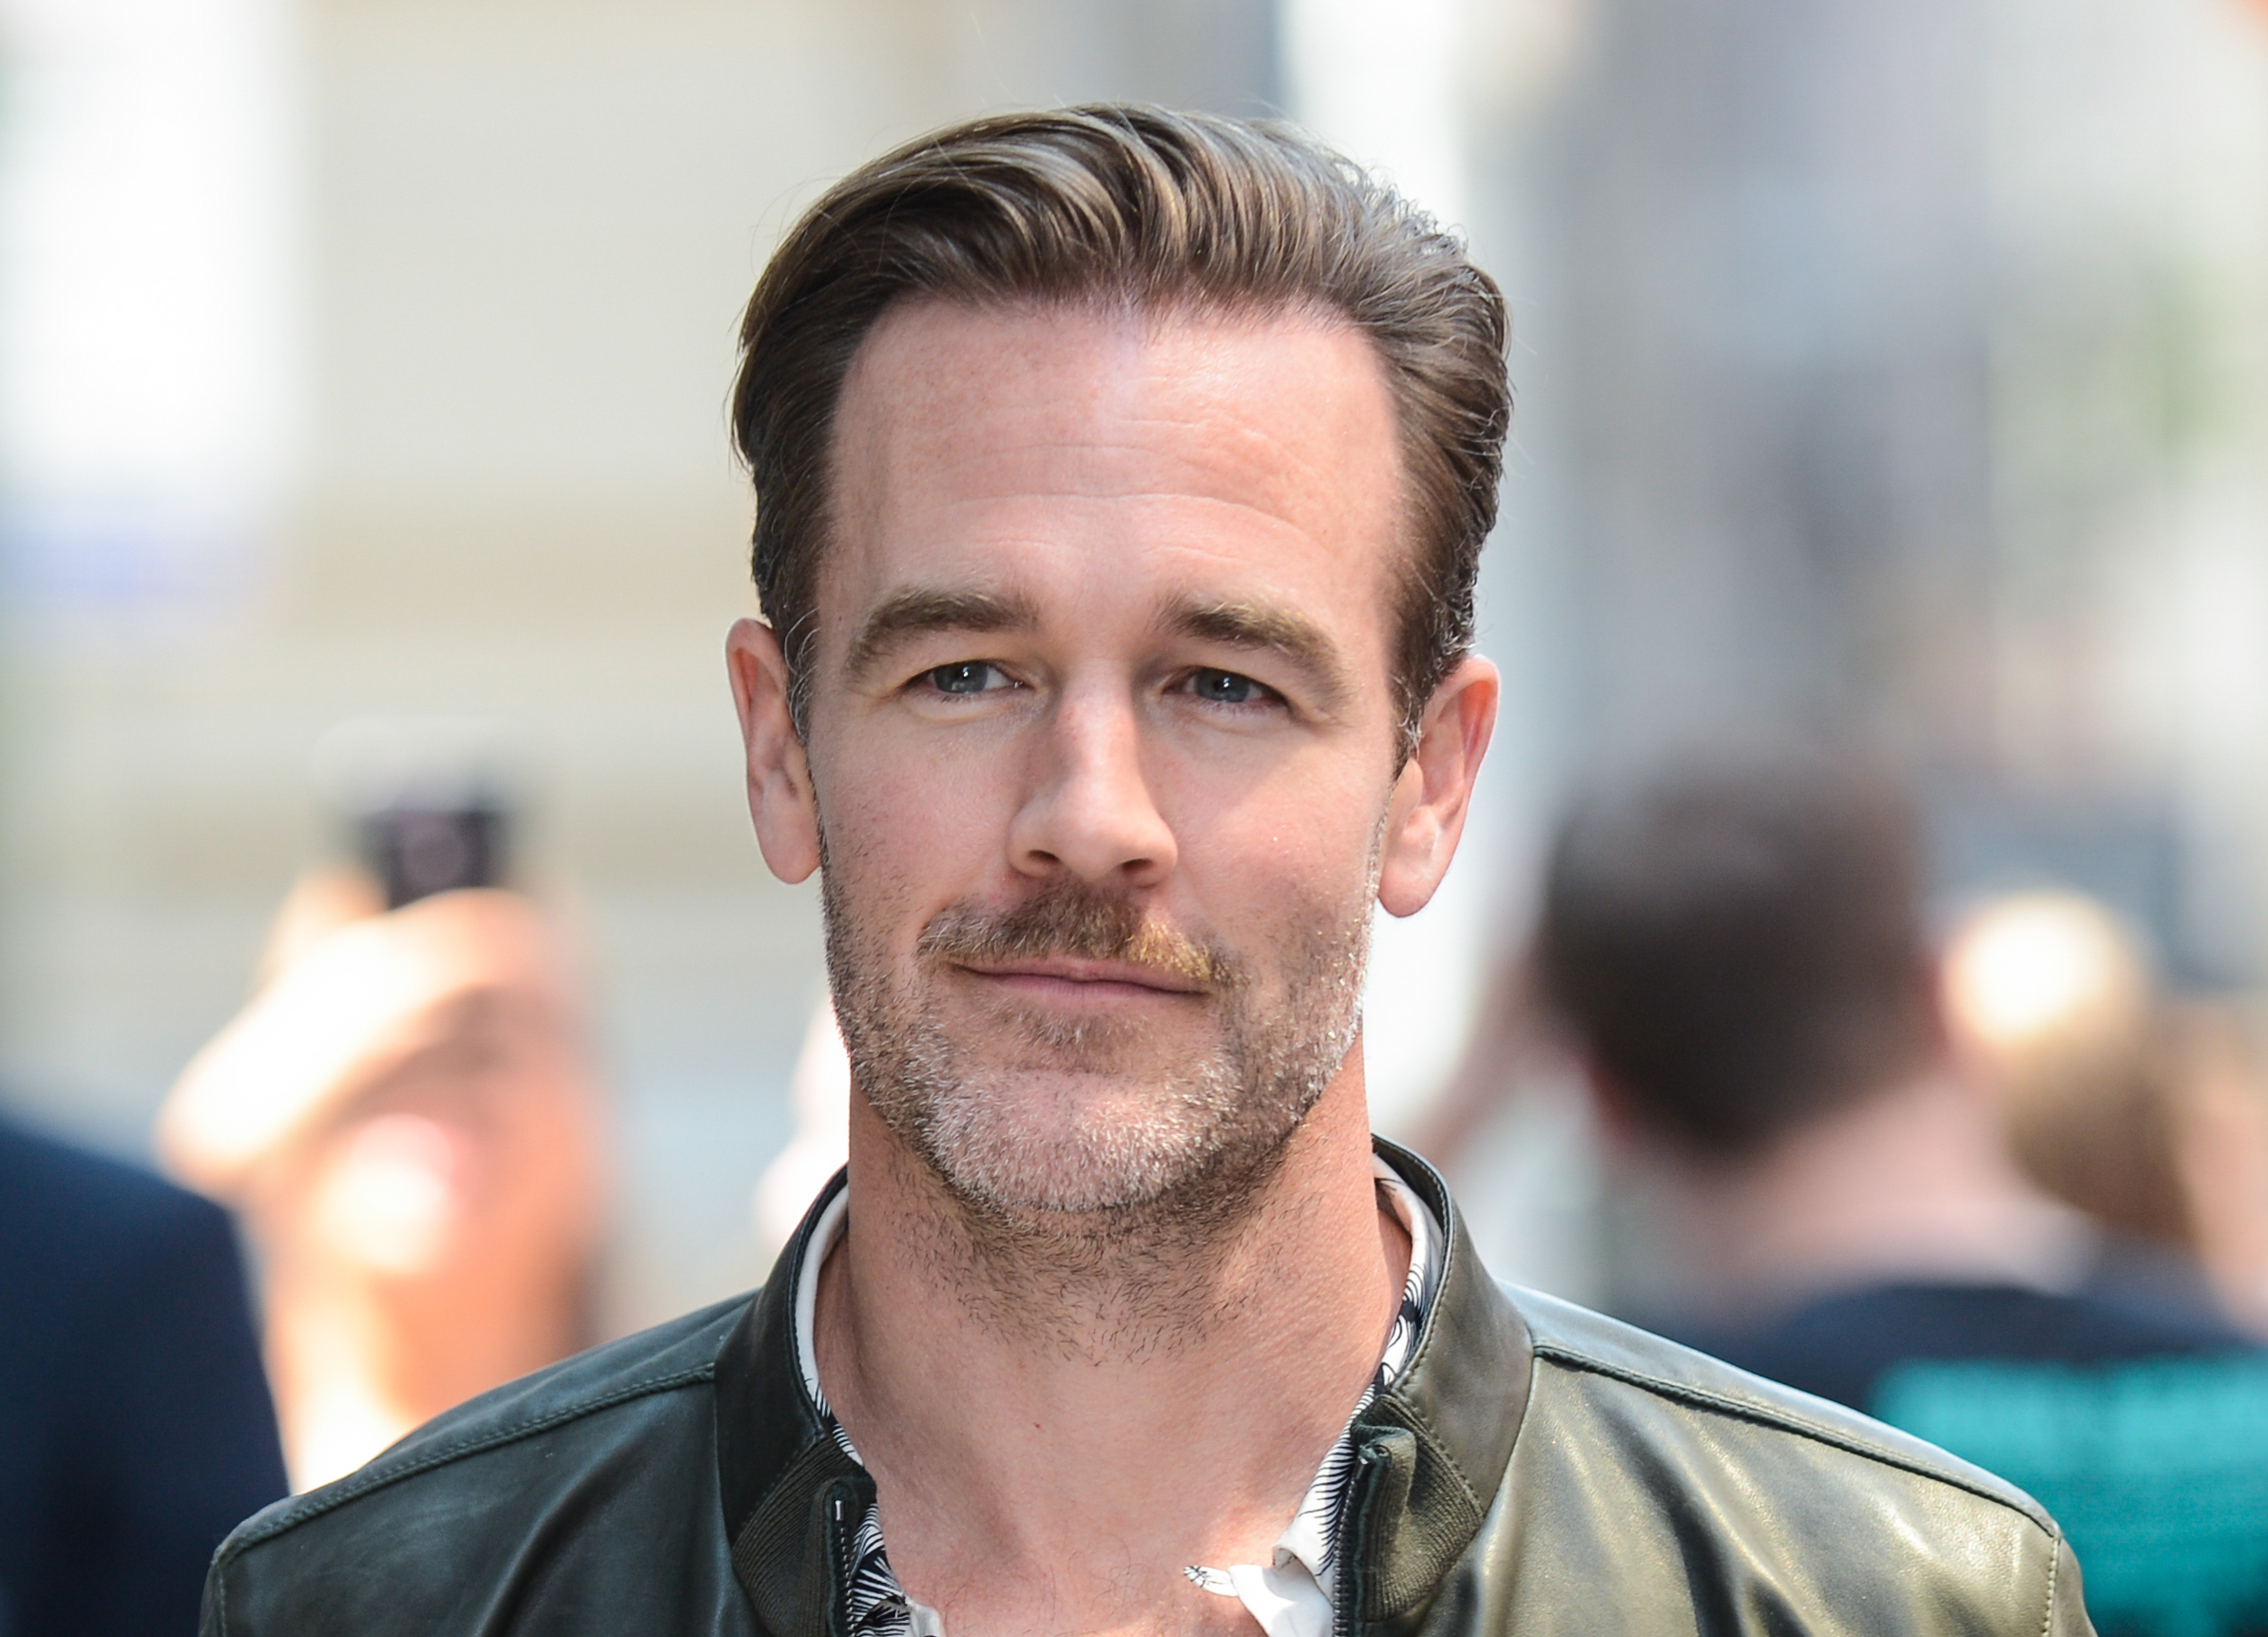 James Van Der Beek Gets Emotional Discussing His Wife’s 2019 Miscarriage: ‘So Much Pain’